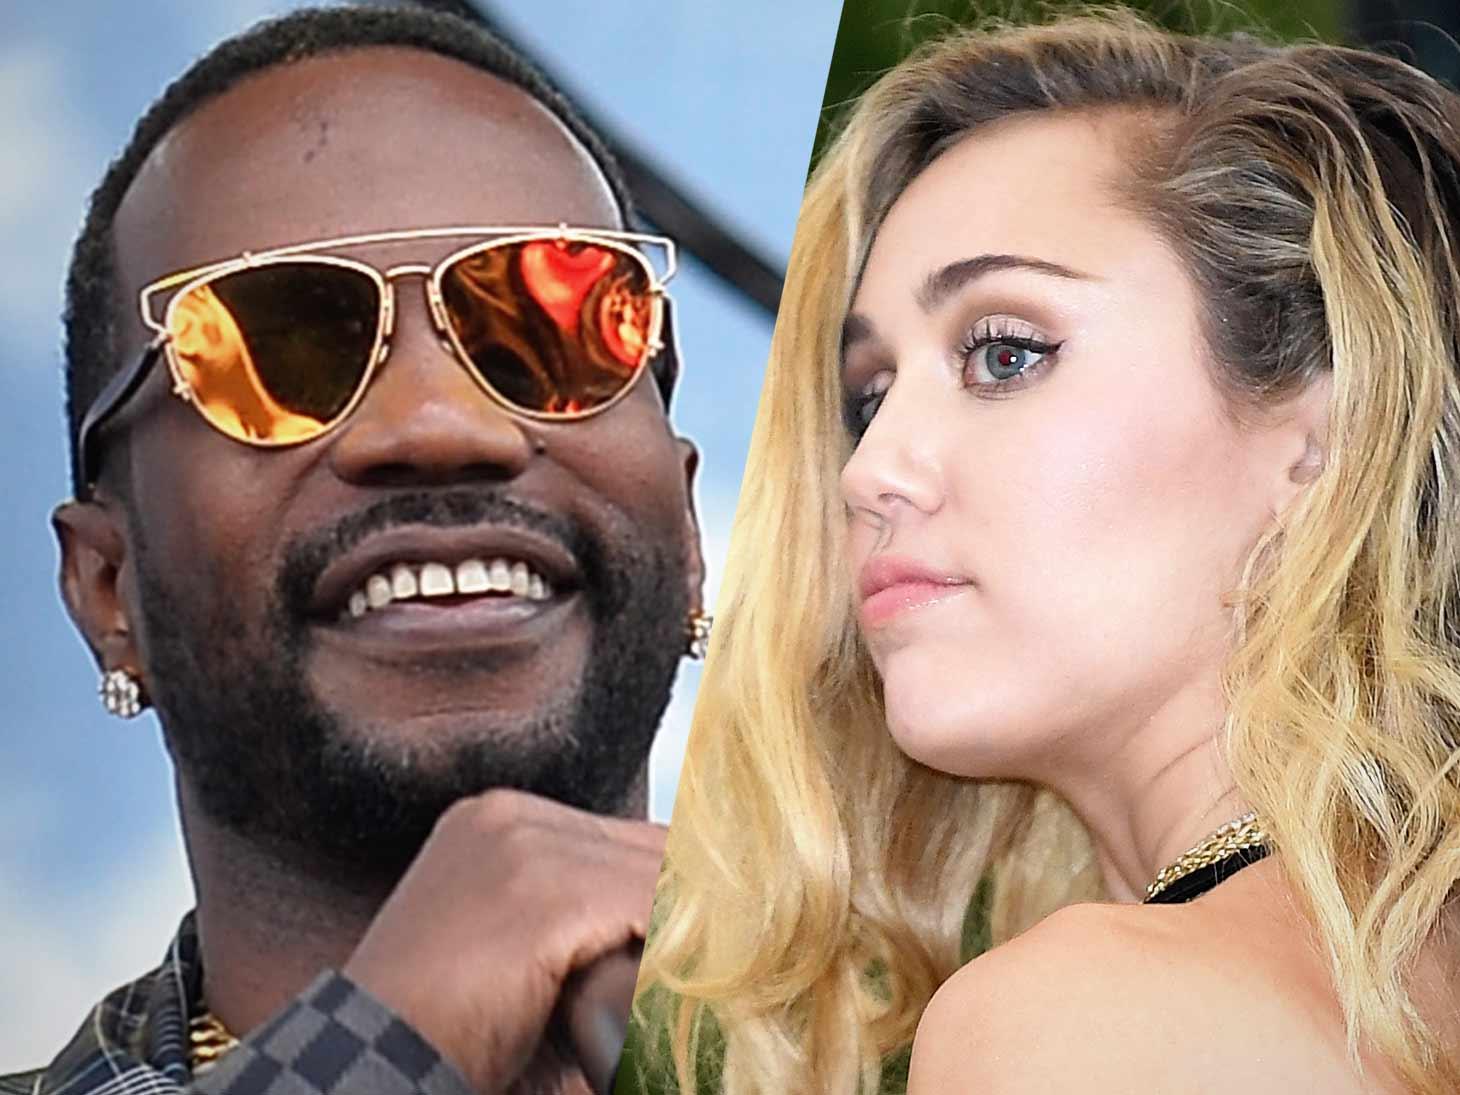 Juicy J Hangs Miley Cyrus Out to Dry in Legal Battle Over Alleged Song Theft